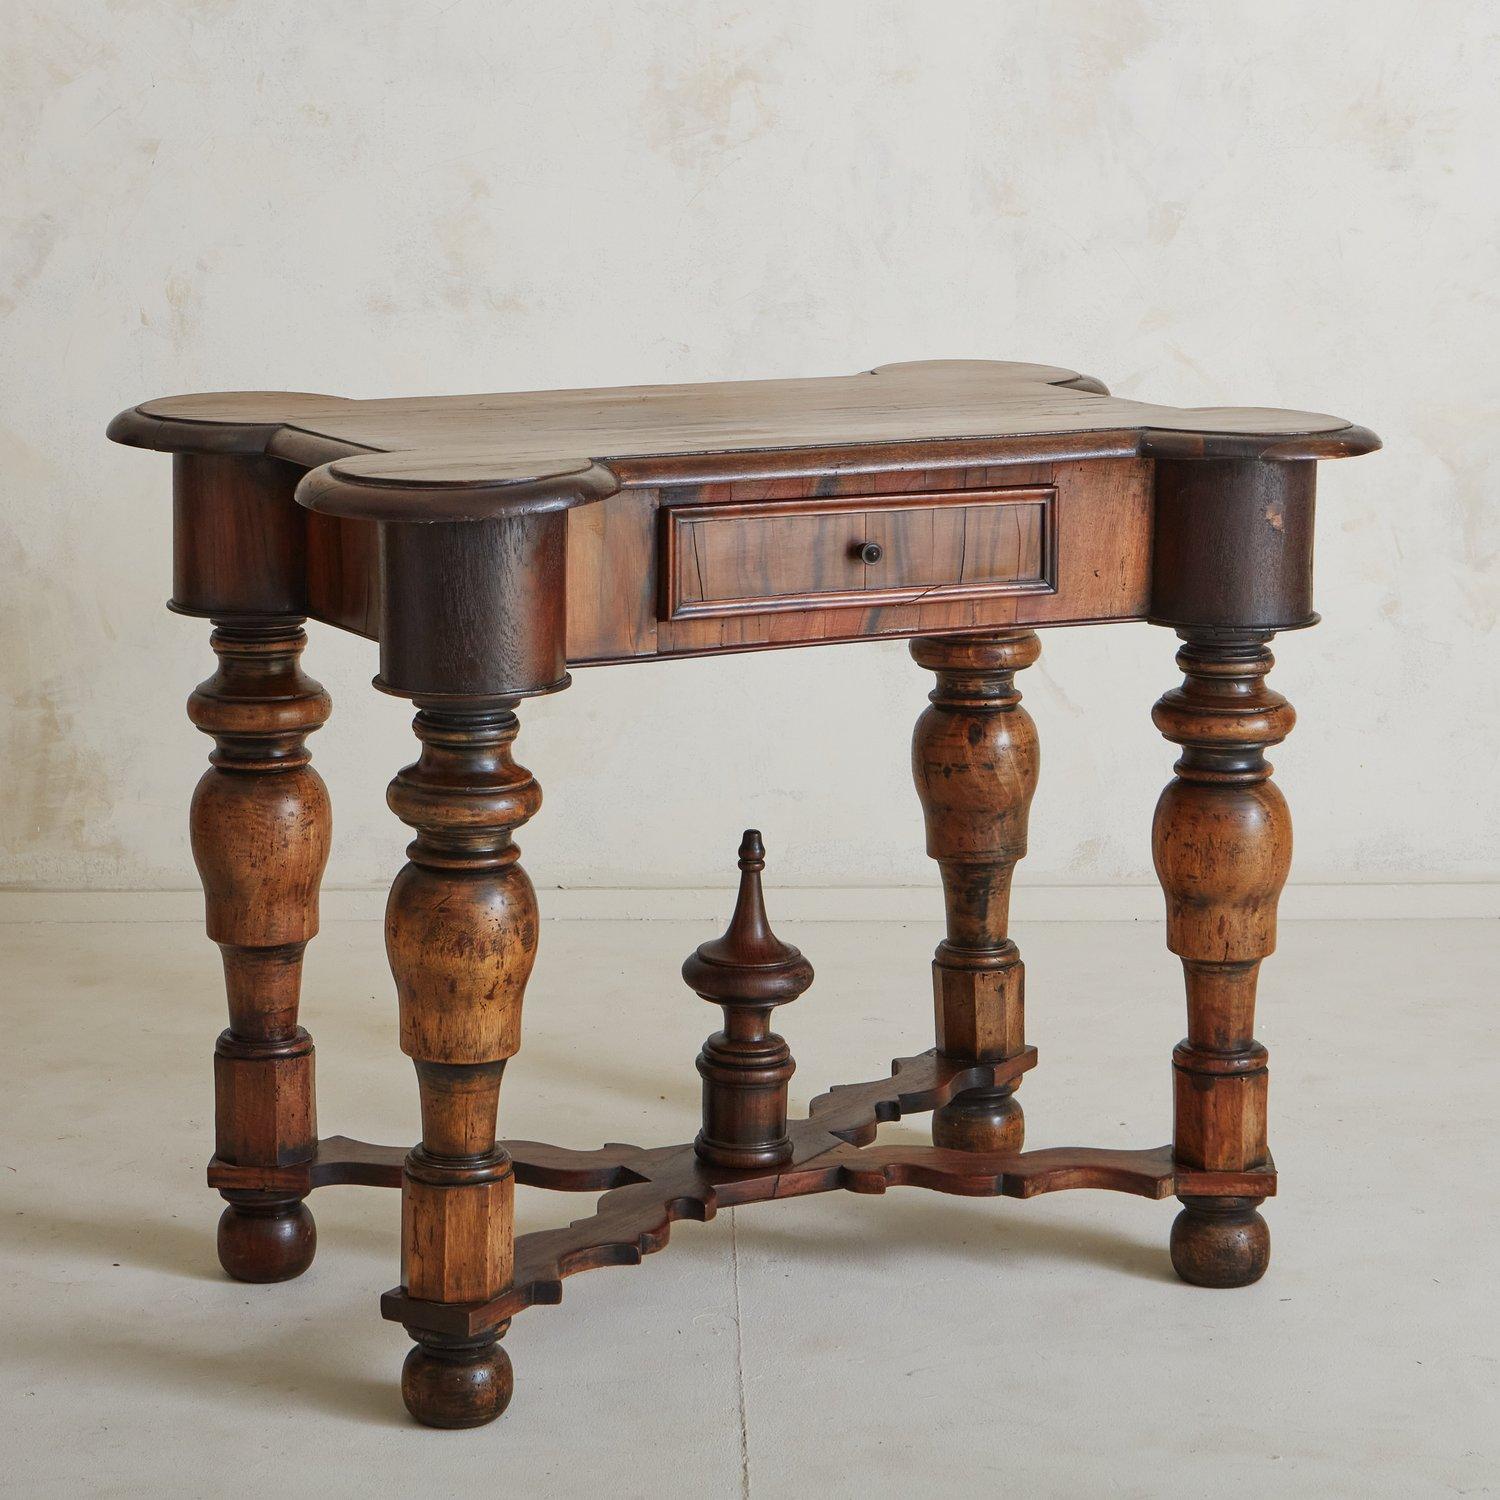 A beautiful antique gueridon sourced in Italy. This gueridon was hand carved with pear and cherry wood and features four intricately turned legs with an ornate X-stretcher punctuated by an oversized decorative finial. The rectangular tabletop has